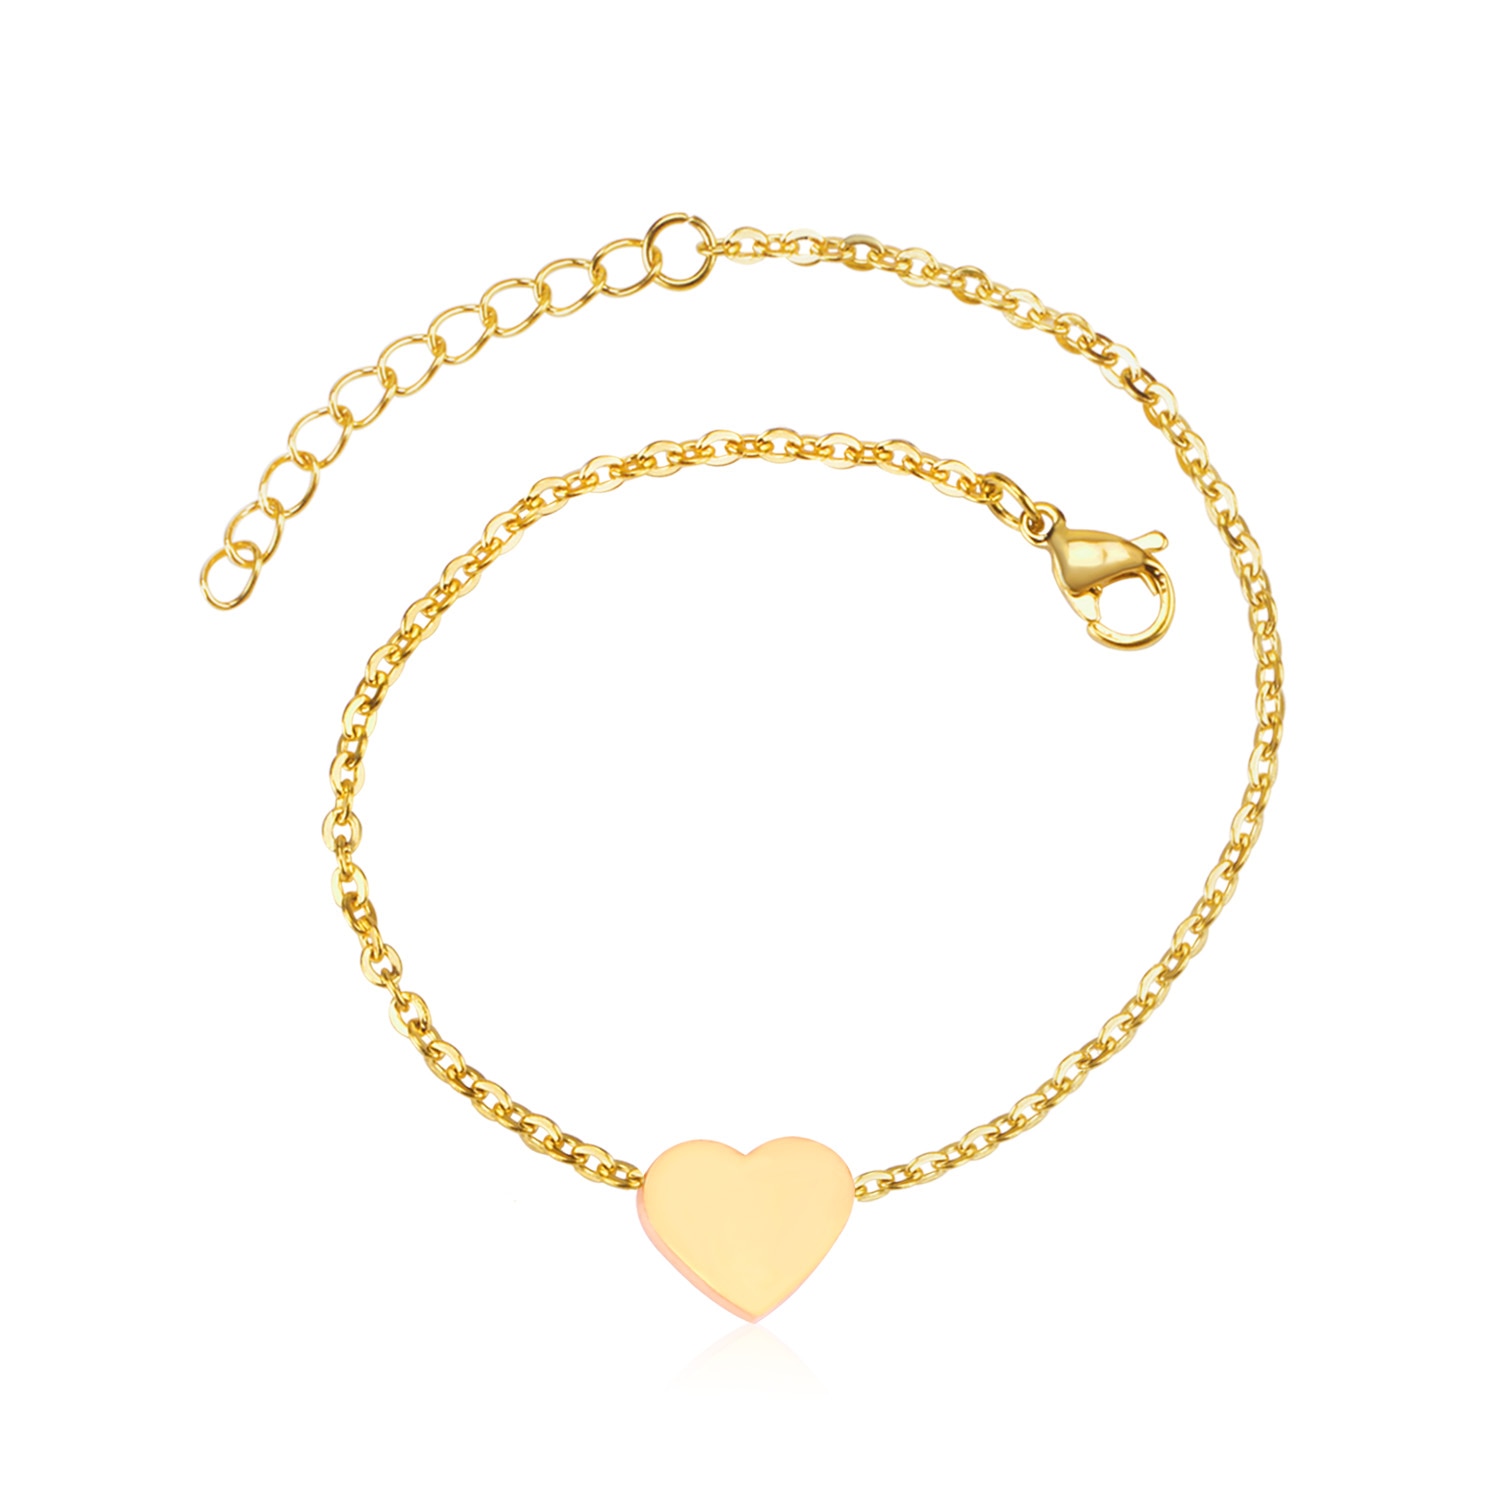 ZARA – Romantic Heart Shaped Stainless Steel Anklet Anklets 8d255f28538fbae46aeae7: Gold|Silver